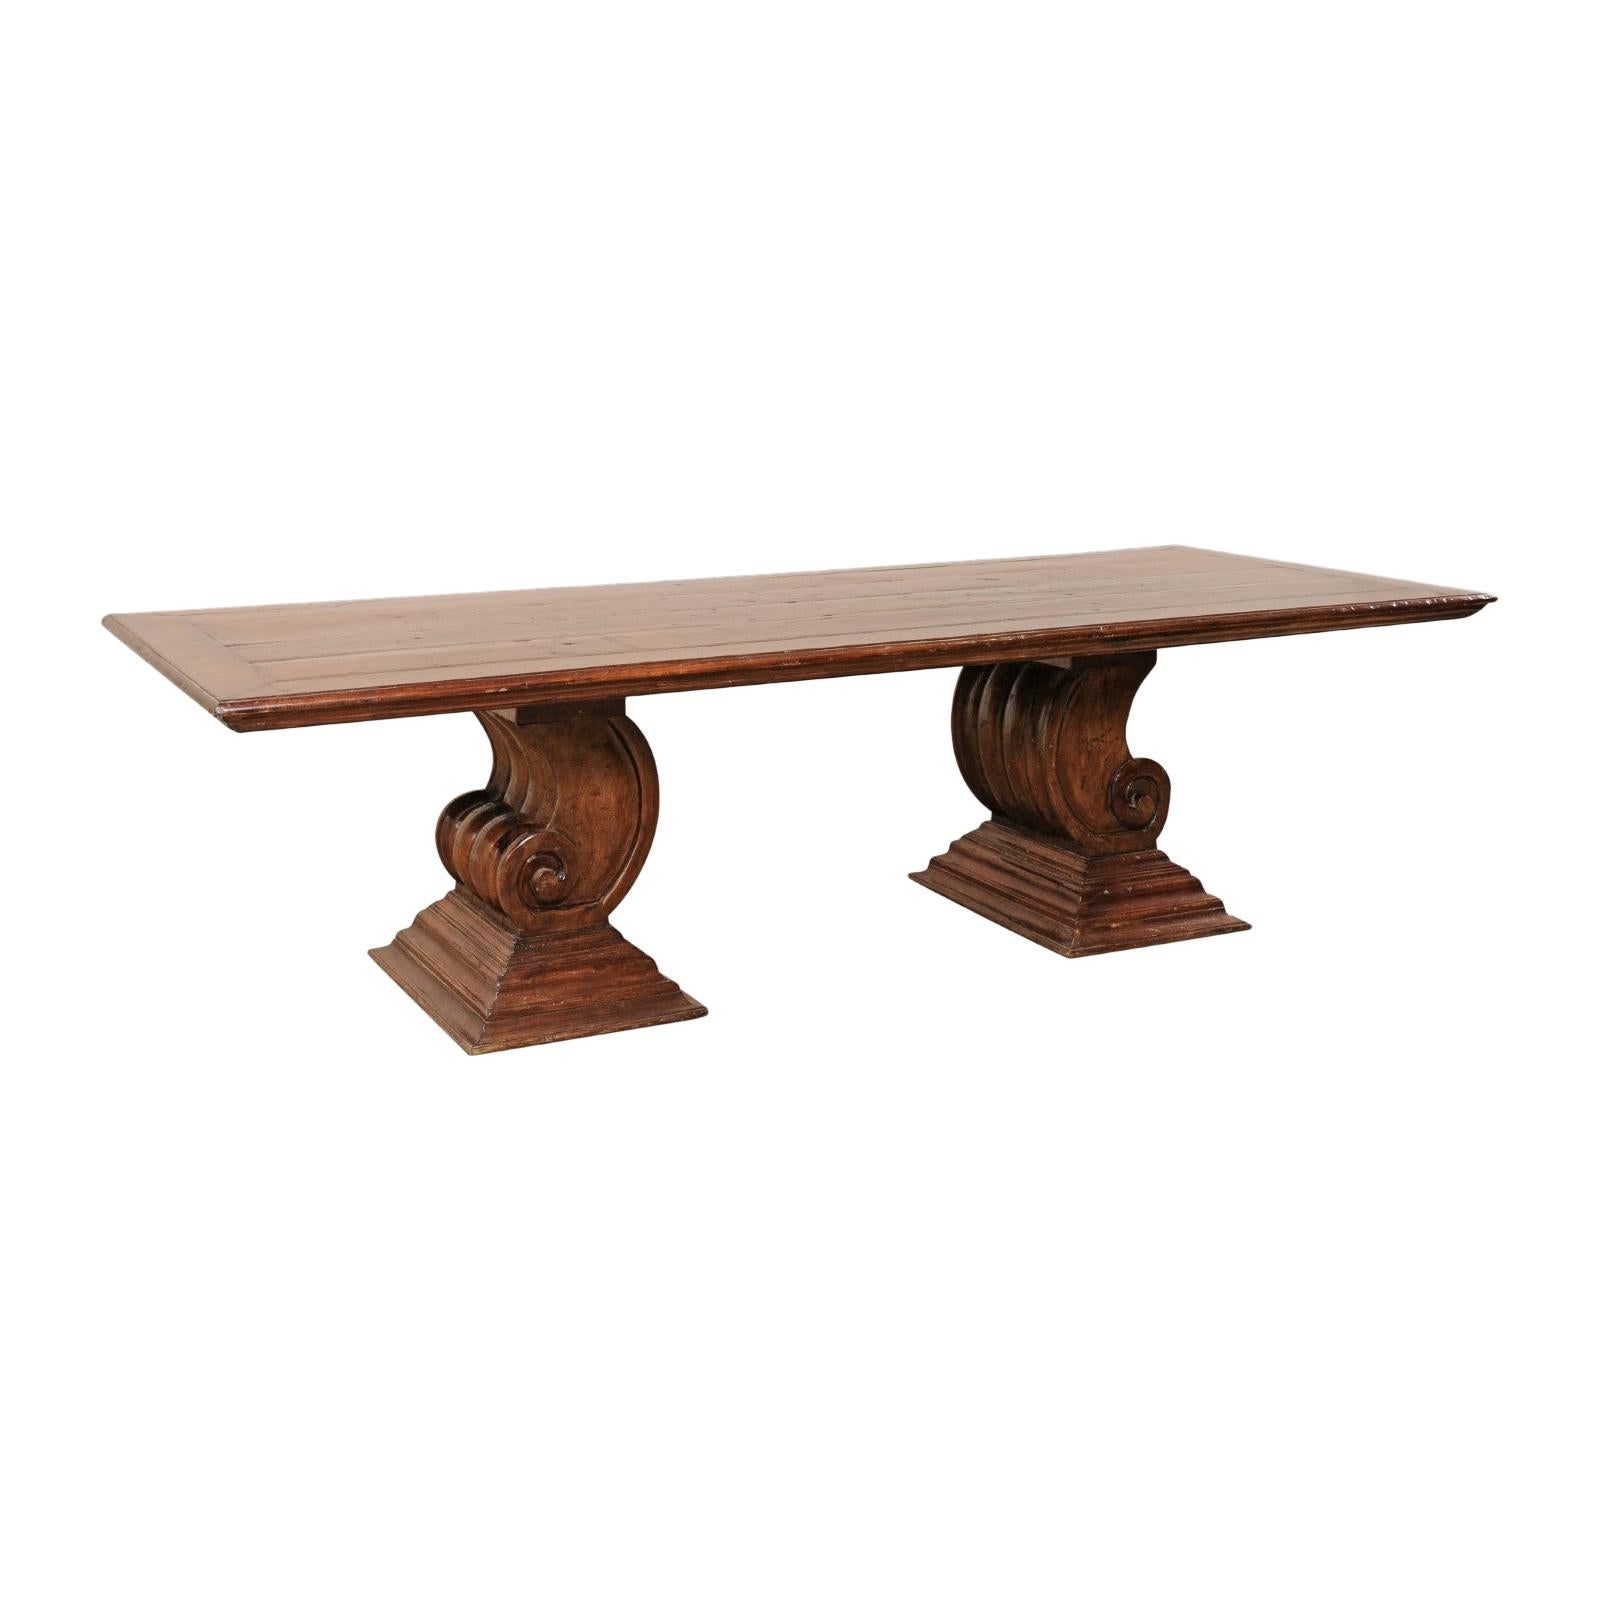 A Peroba Wood Dining or Conference Table w/ Fabulously Thick Carved Scroll Bases For Sale